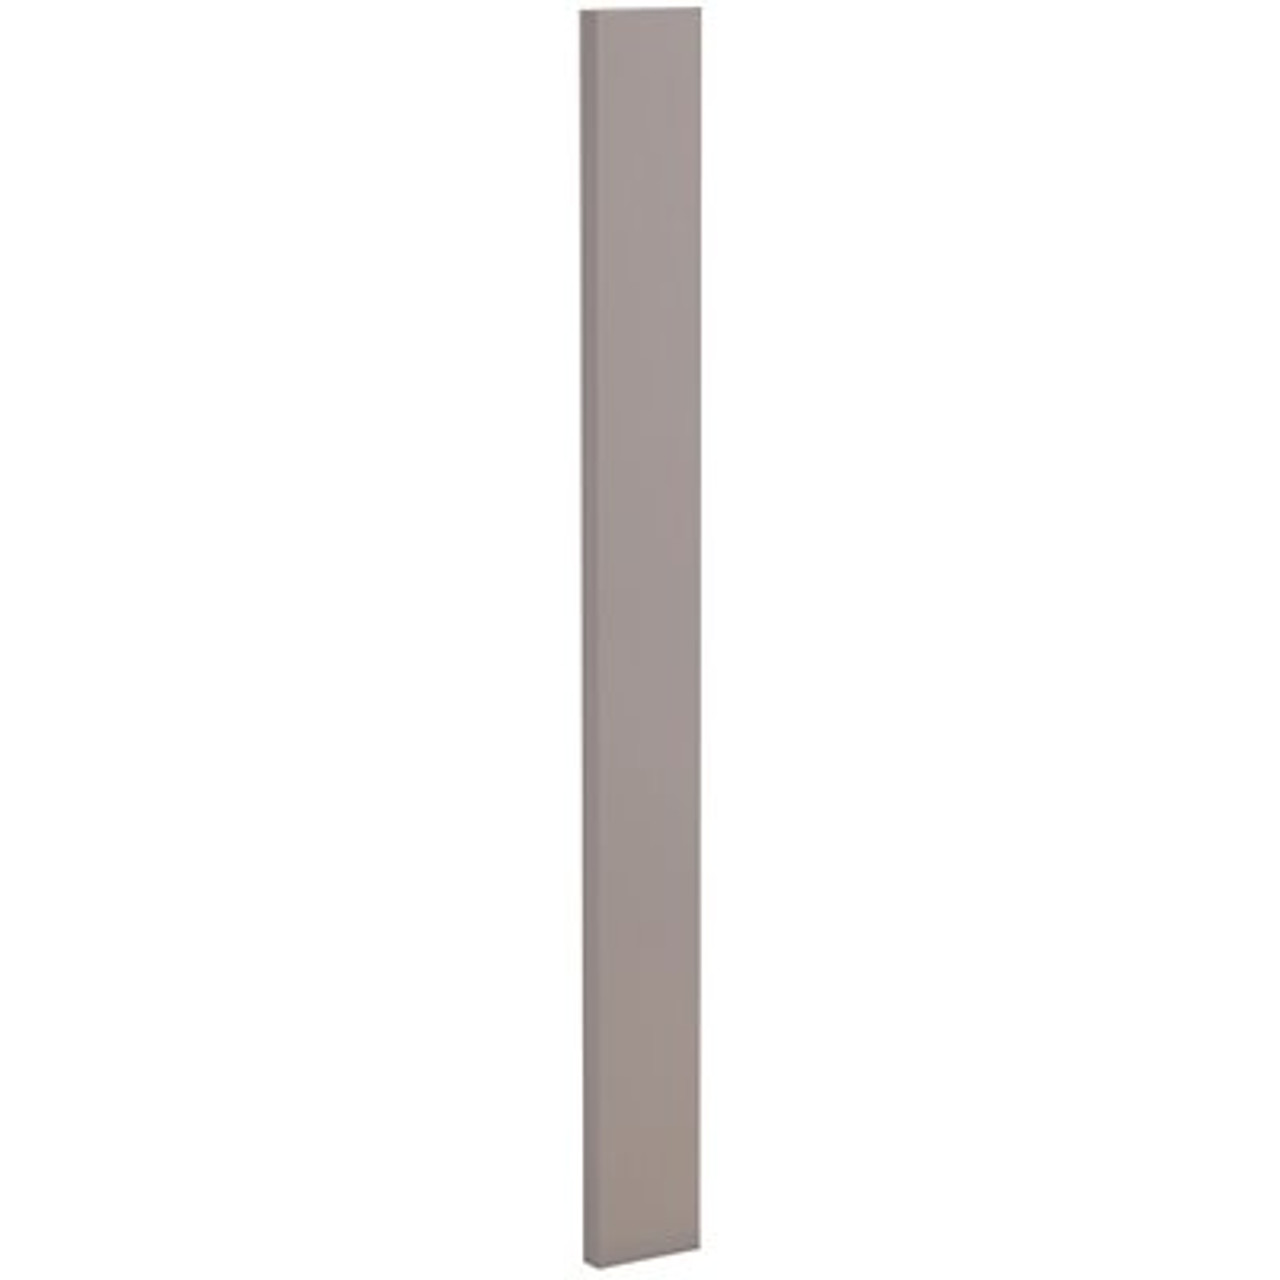 Arlington Veiled Gray Shaker Assembled Plywood 3 In. X 30 In. X 0.75 In. Kitchen Cabinet Filler Strip